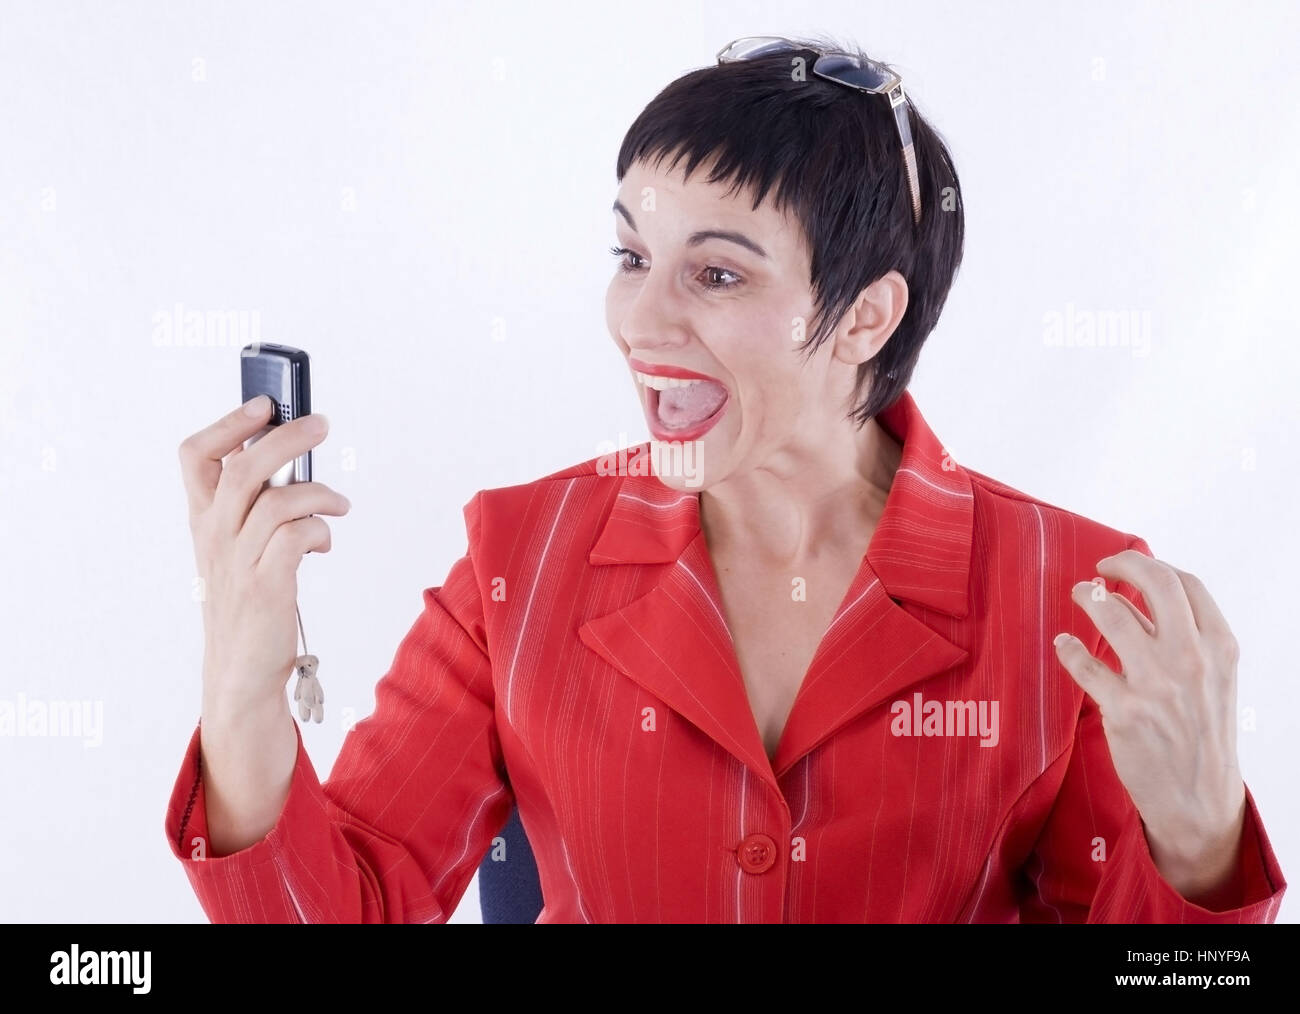 Model release , Schreiende Geschaeftsfrau mit Handy - screaming business woman with mobile phone Stock Photo